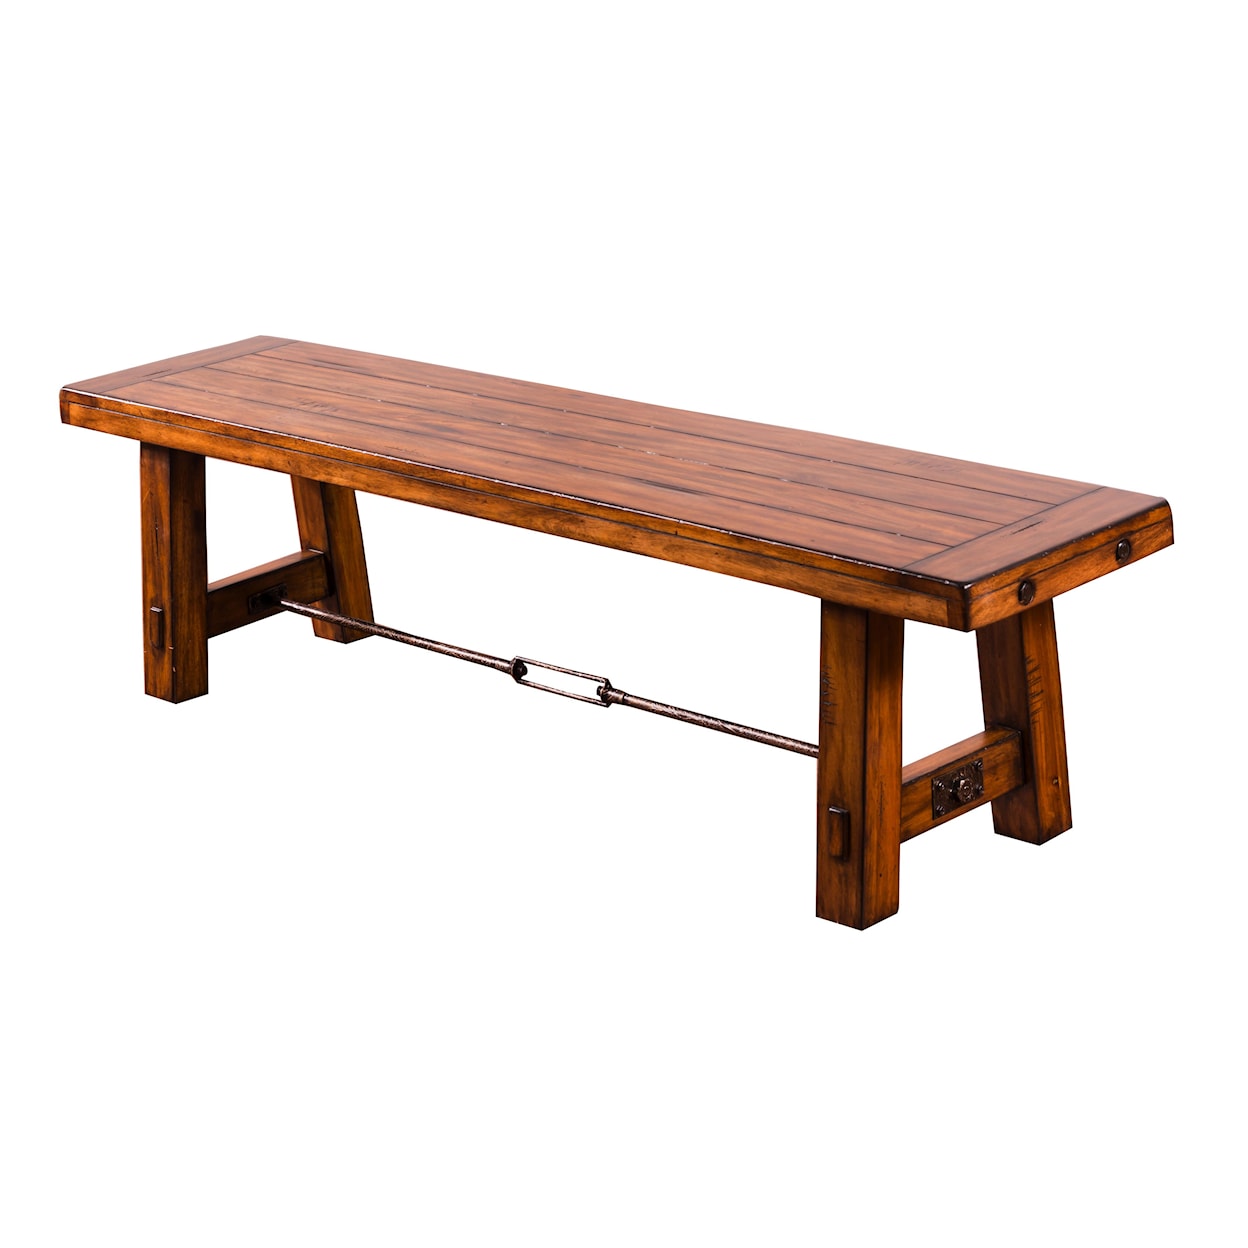 Sunny Designs Tremont Tremont Dining Bench